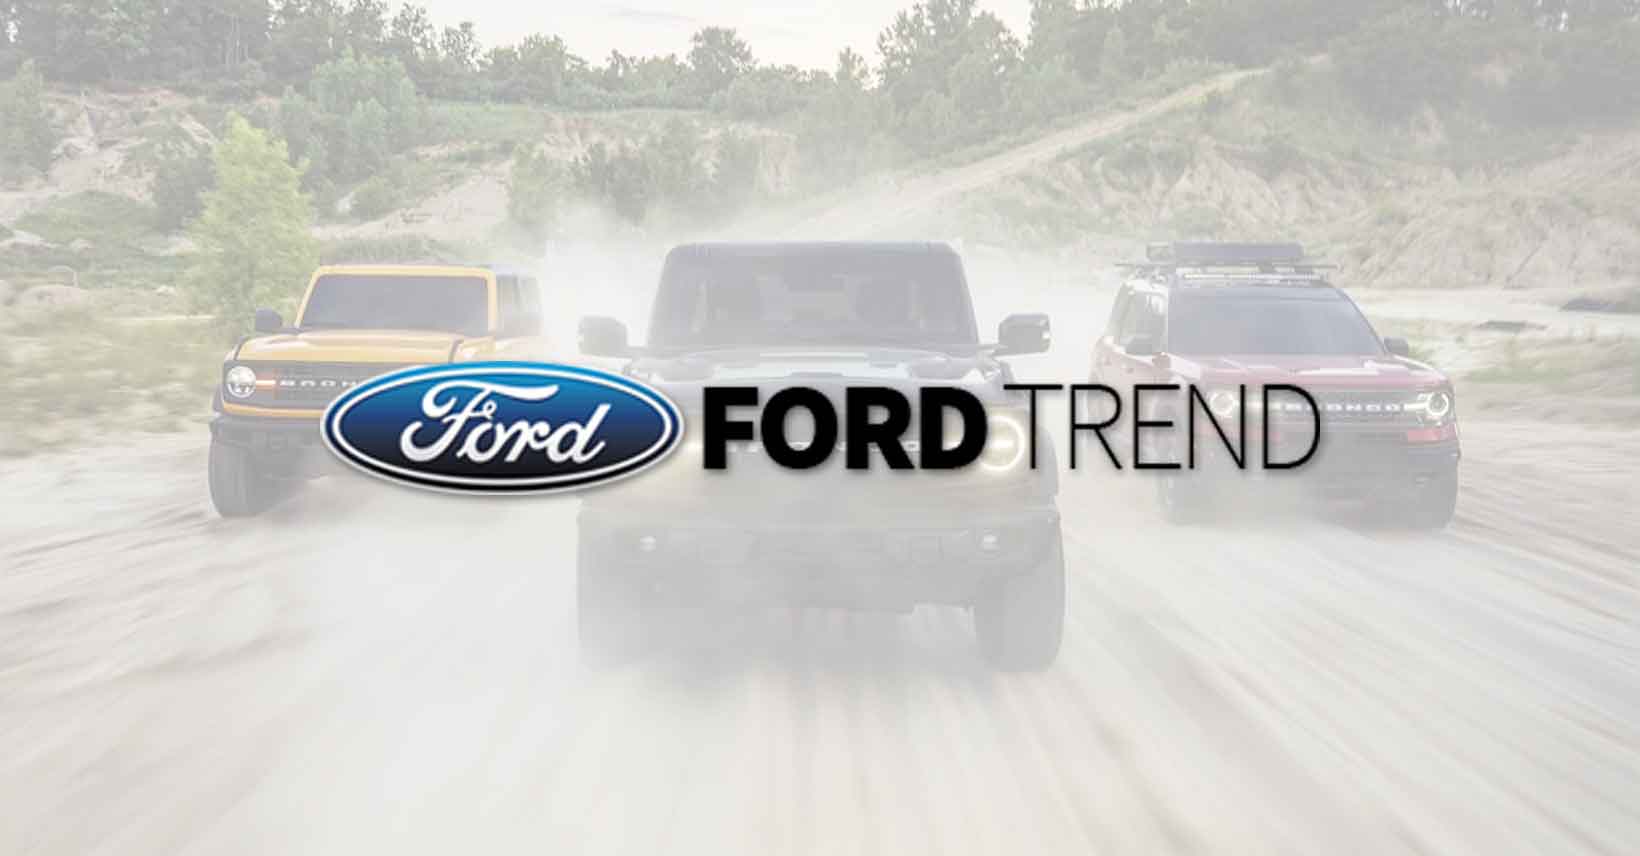 All-New 2023 Ford Super Duty Trucks Review | Ford Trend